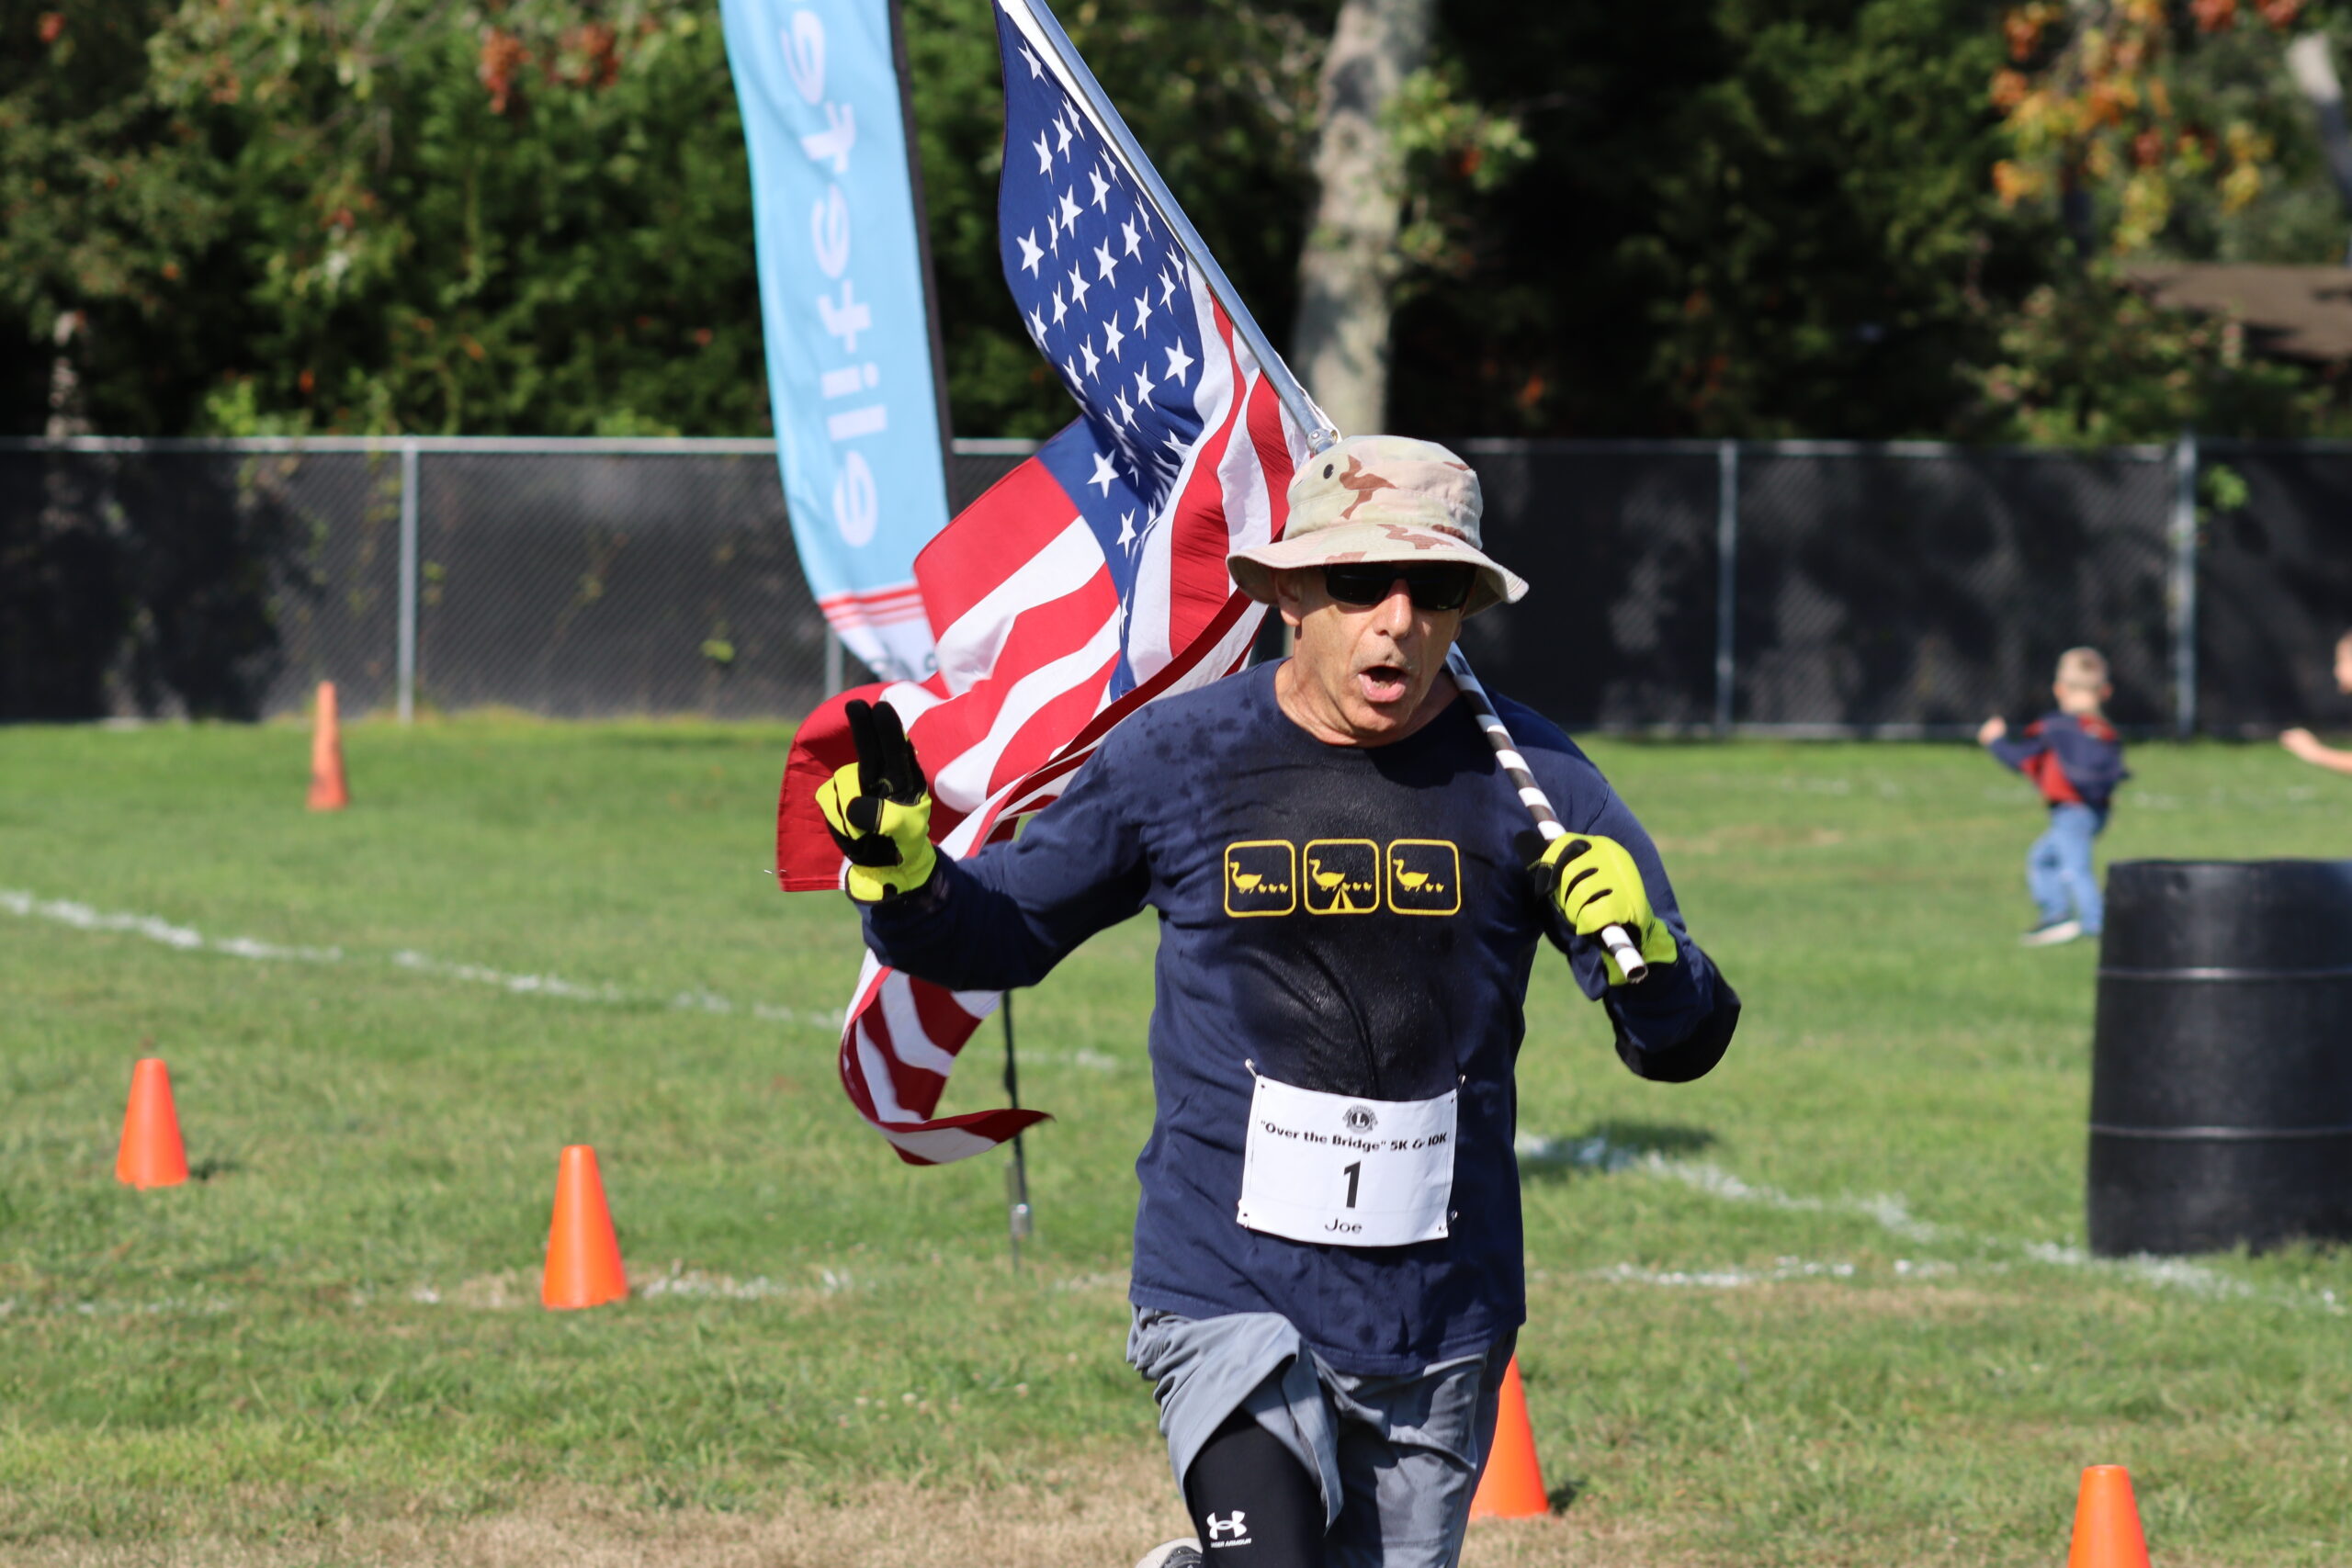 Joe Sferrazza of Manorville ran the 5K with an American flag, to honor veterans. CAILIN RILEY